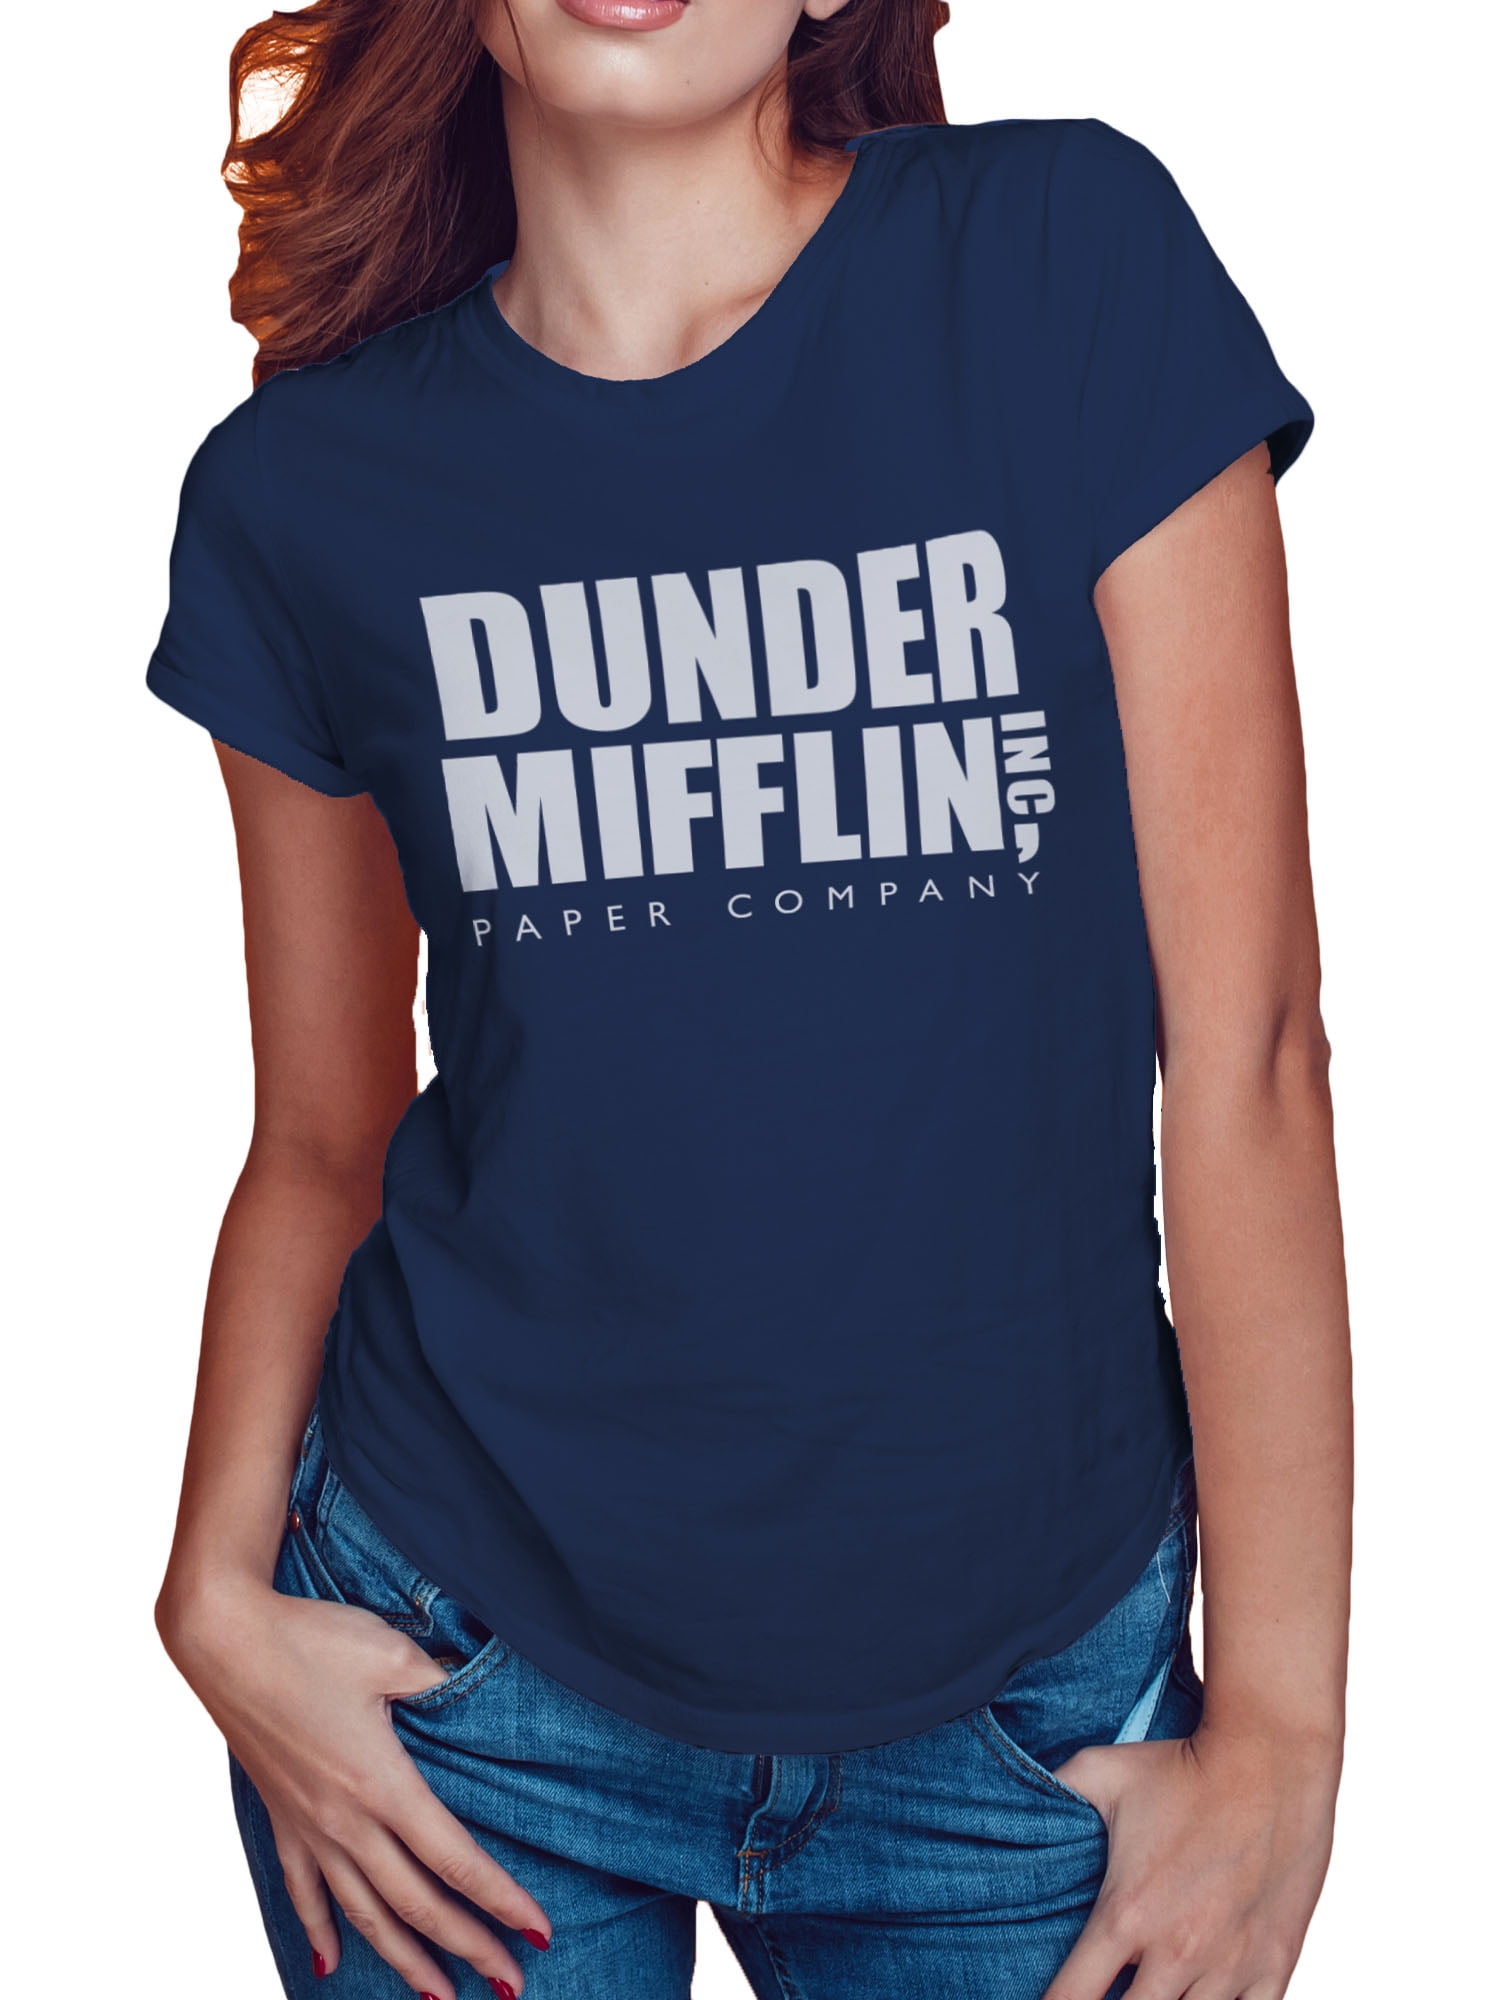 Drinking Funny Juniors T-shirt Details about   My Two Favorite Words Wine & Dine